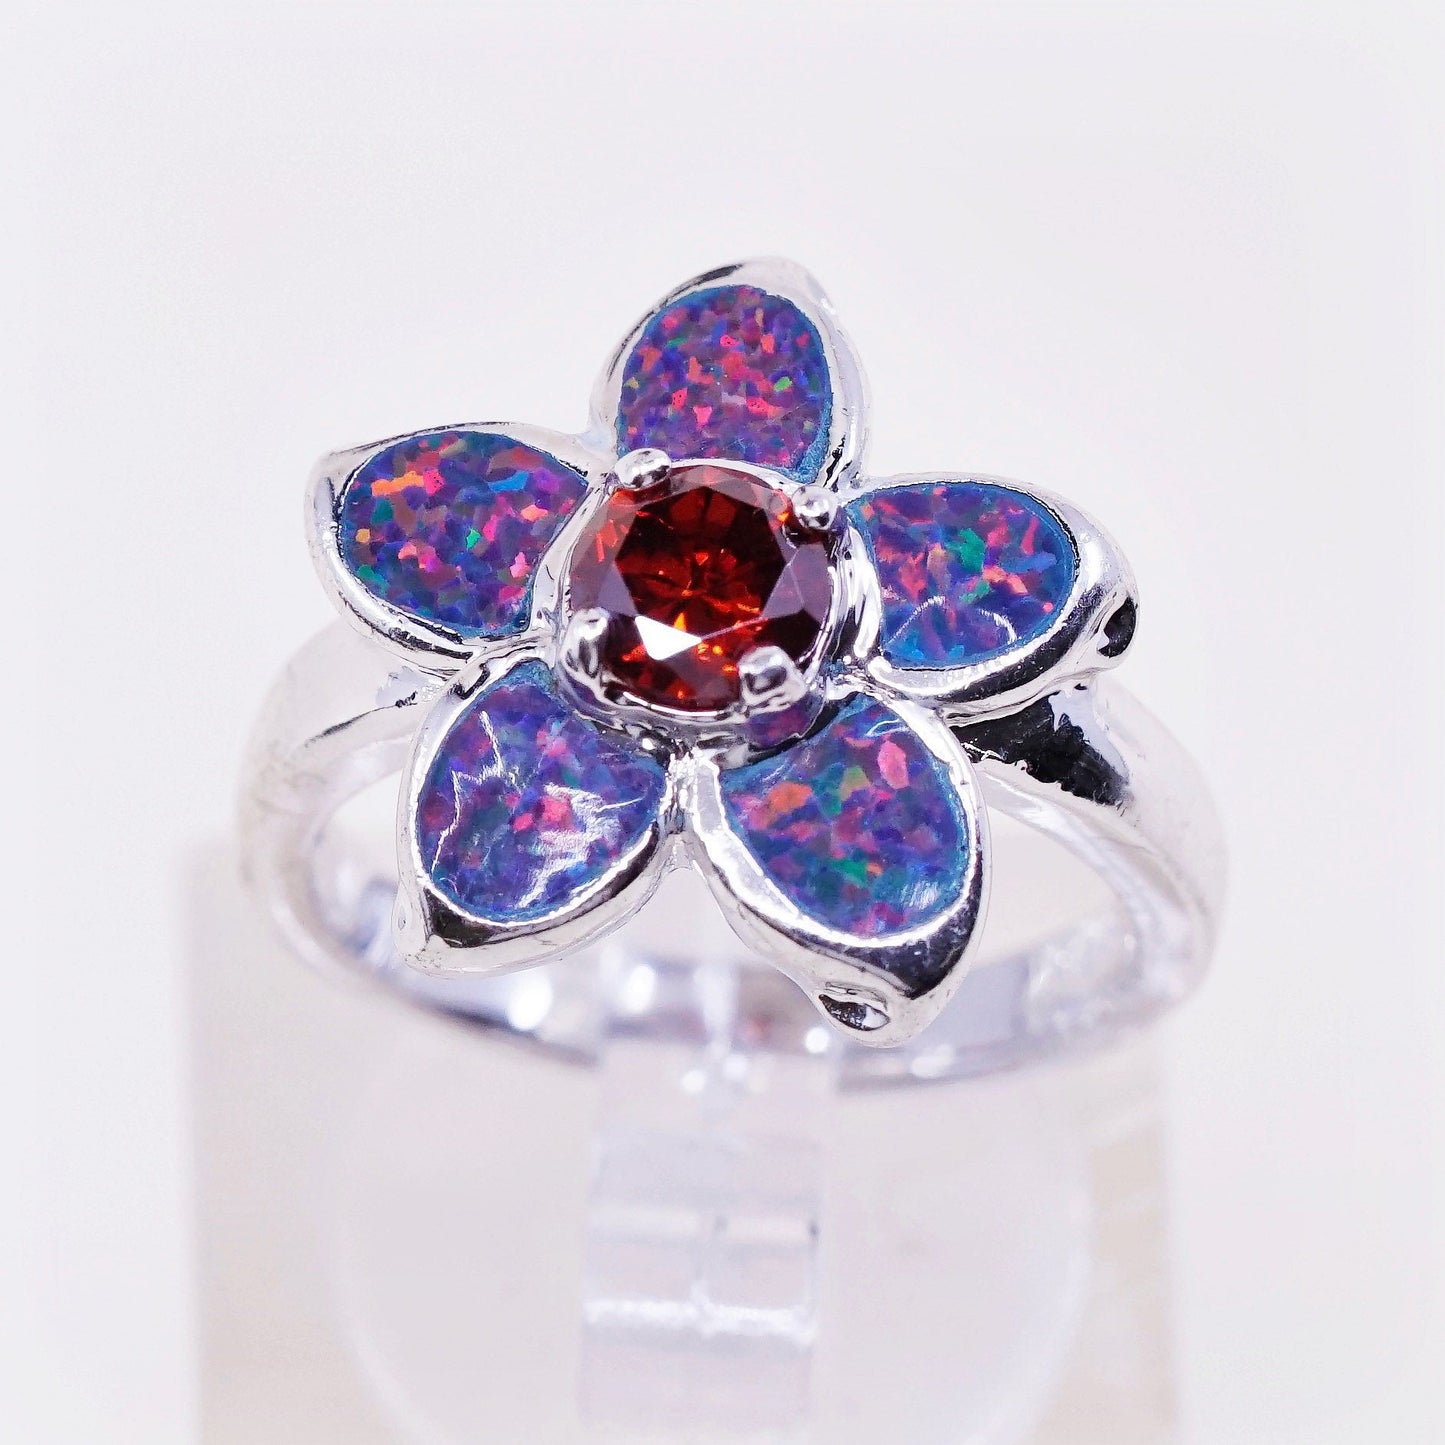 sz 6, Sterling 925 silver handmade flower ring w/ fire opal and ruby